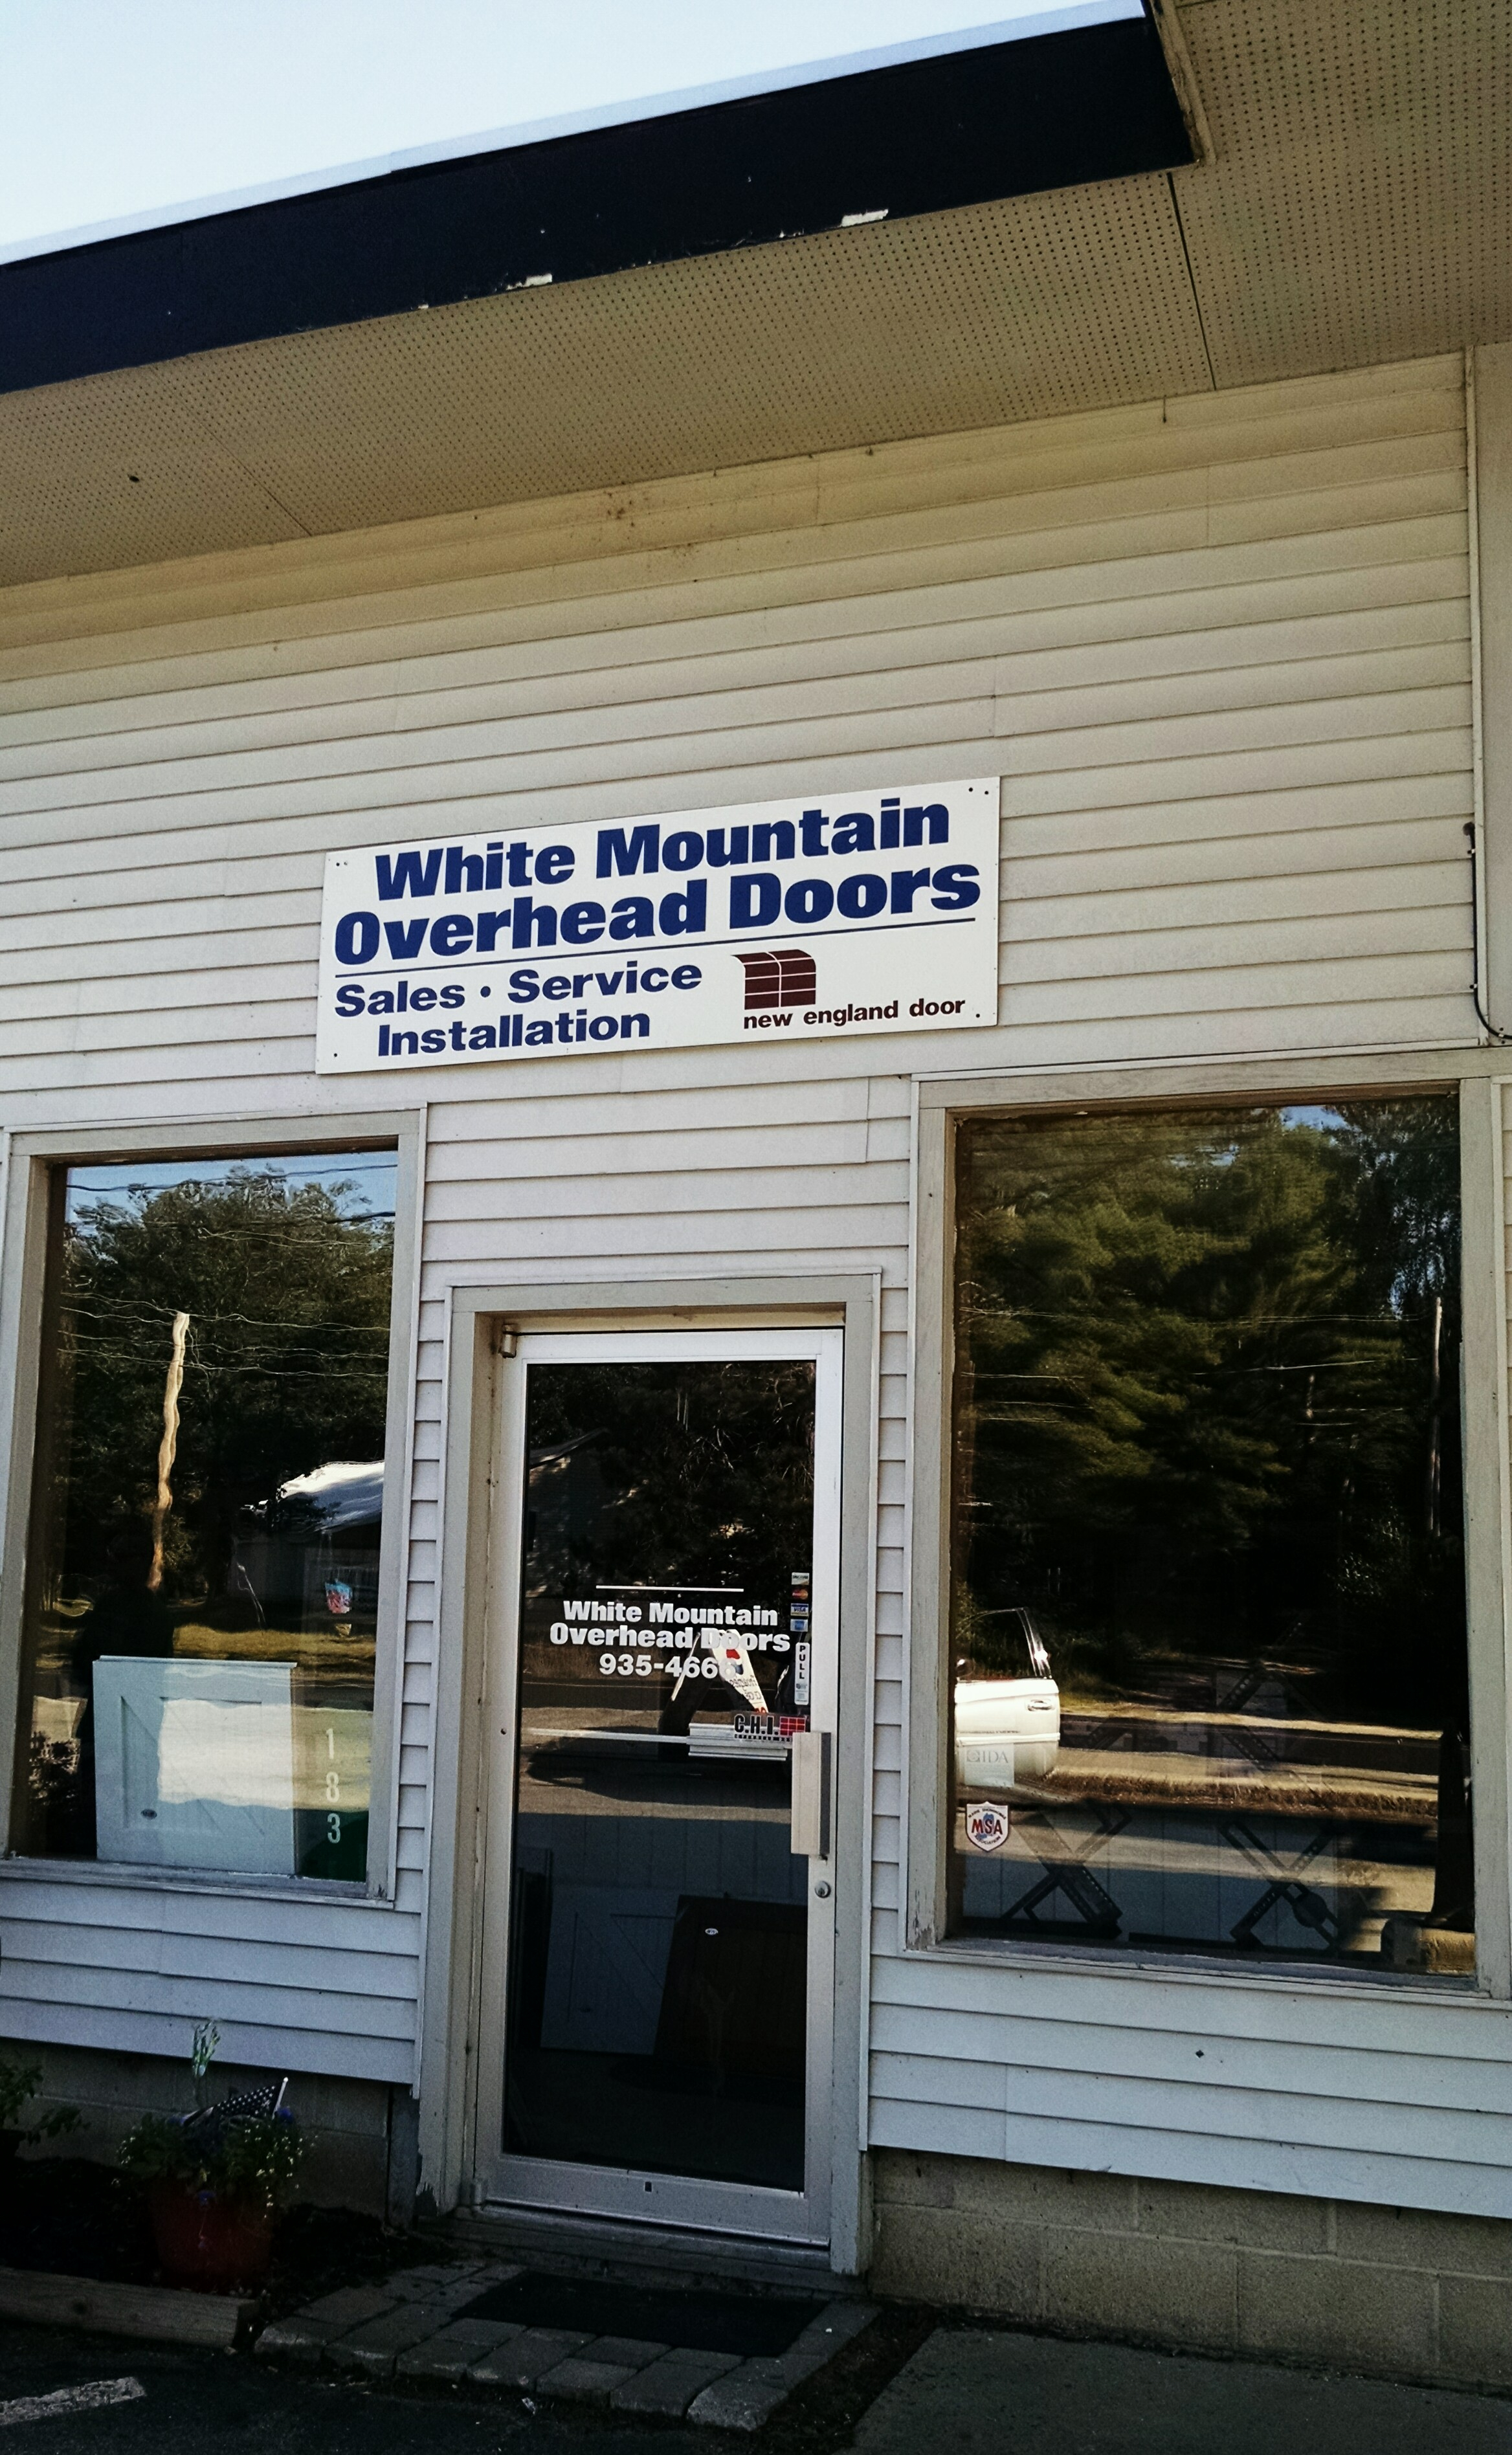 White Mountain Overhead Doors Better Business Bureau Profile intended for size 2336 X 3793